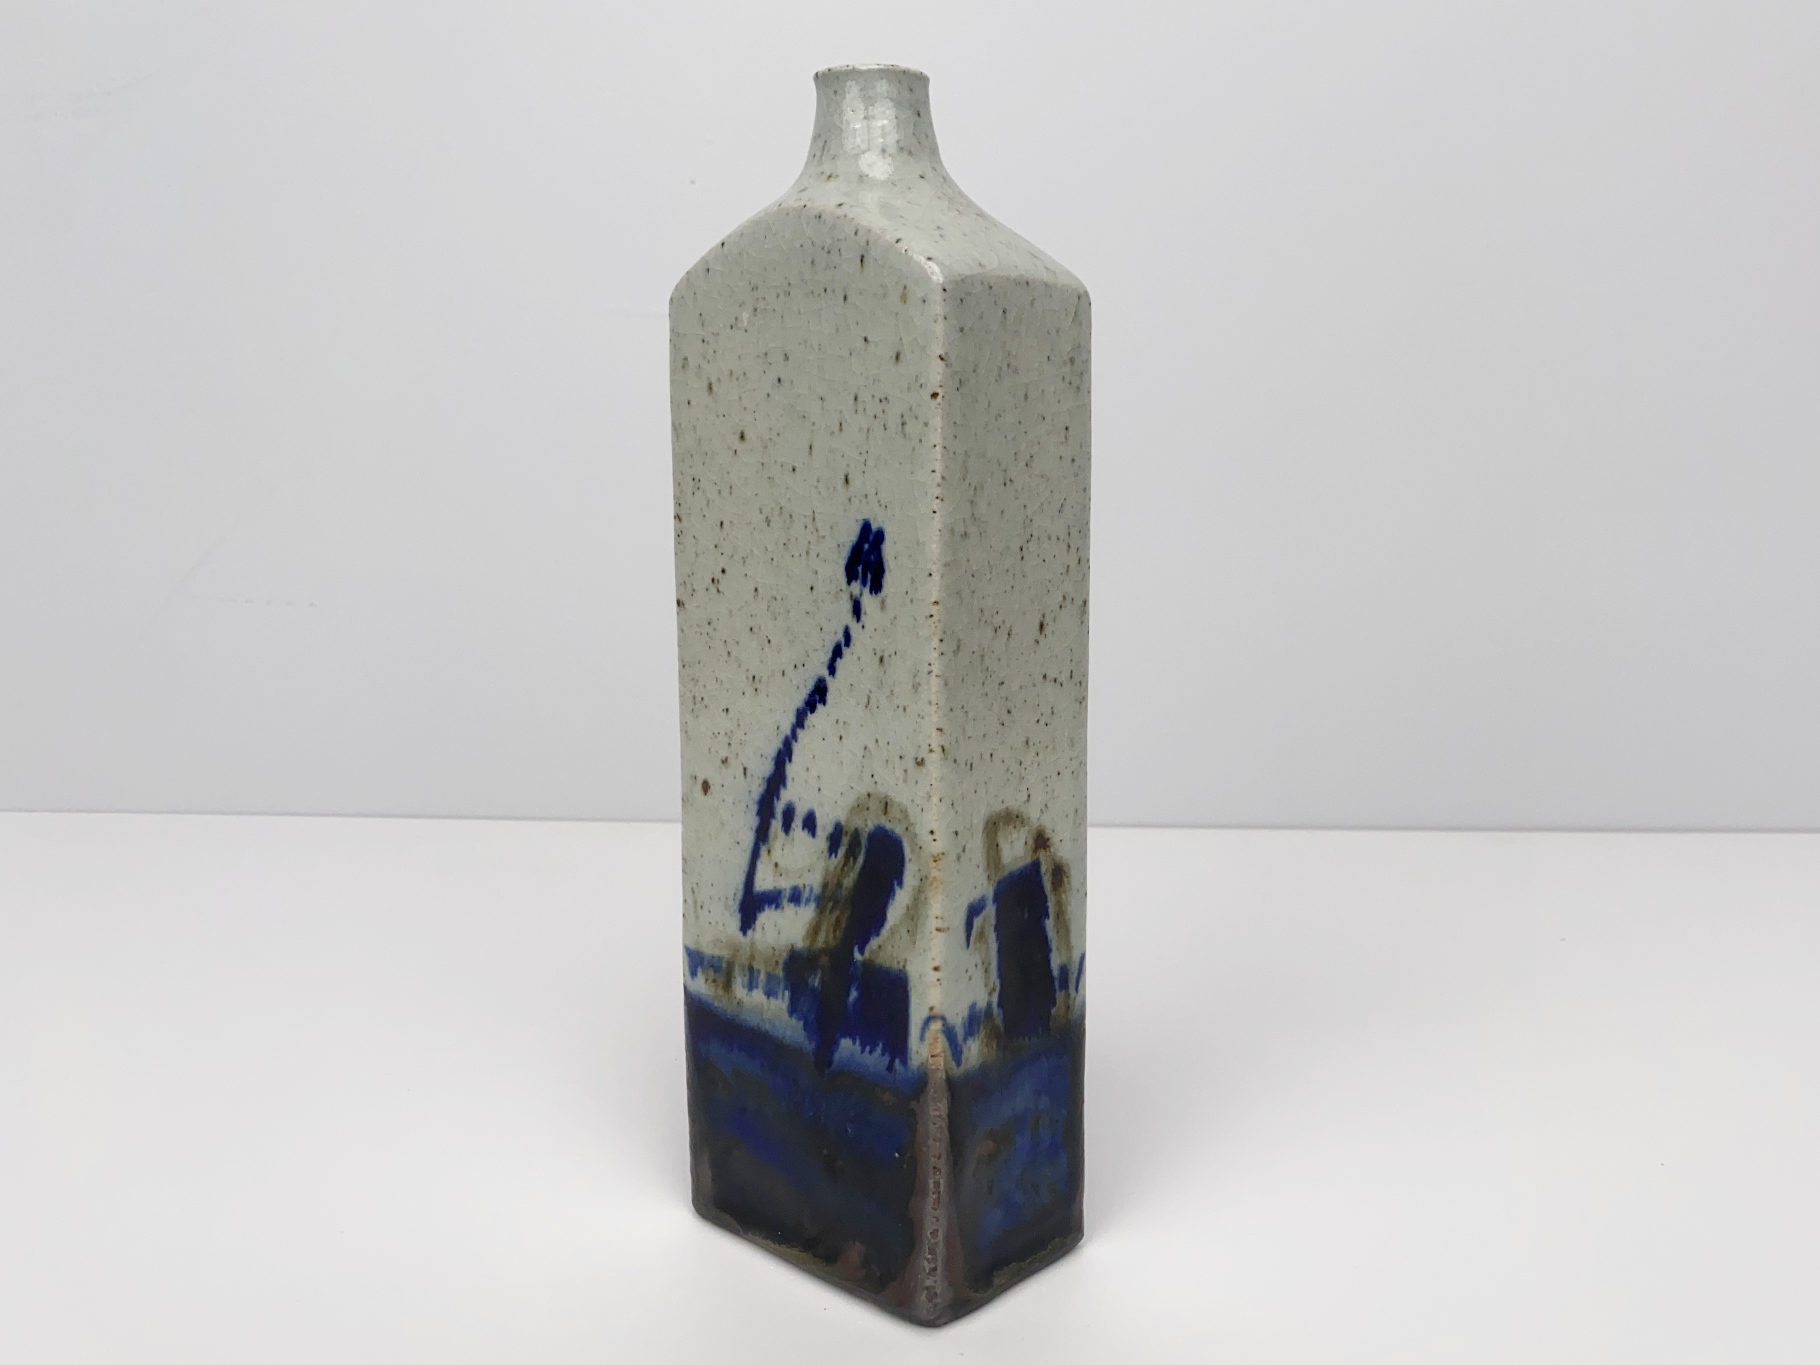 Vase, Ceramic, Stoneware, Unique Piece, abstract Painting and glazed, 1980s